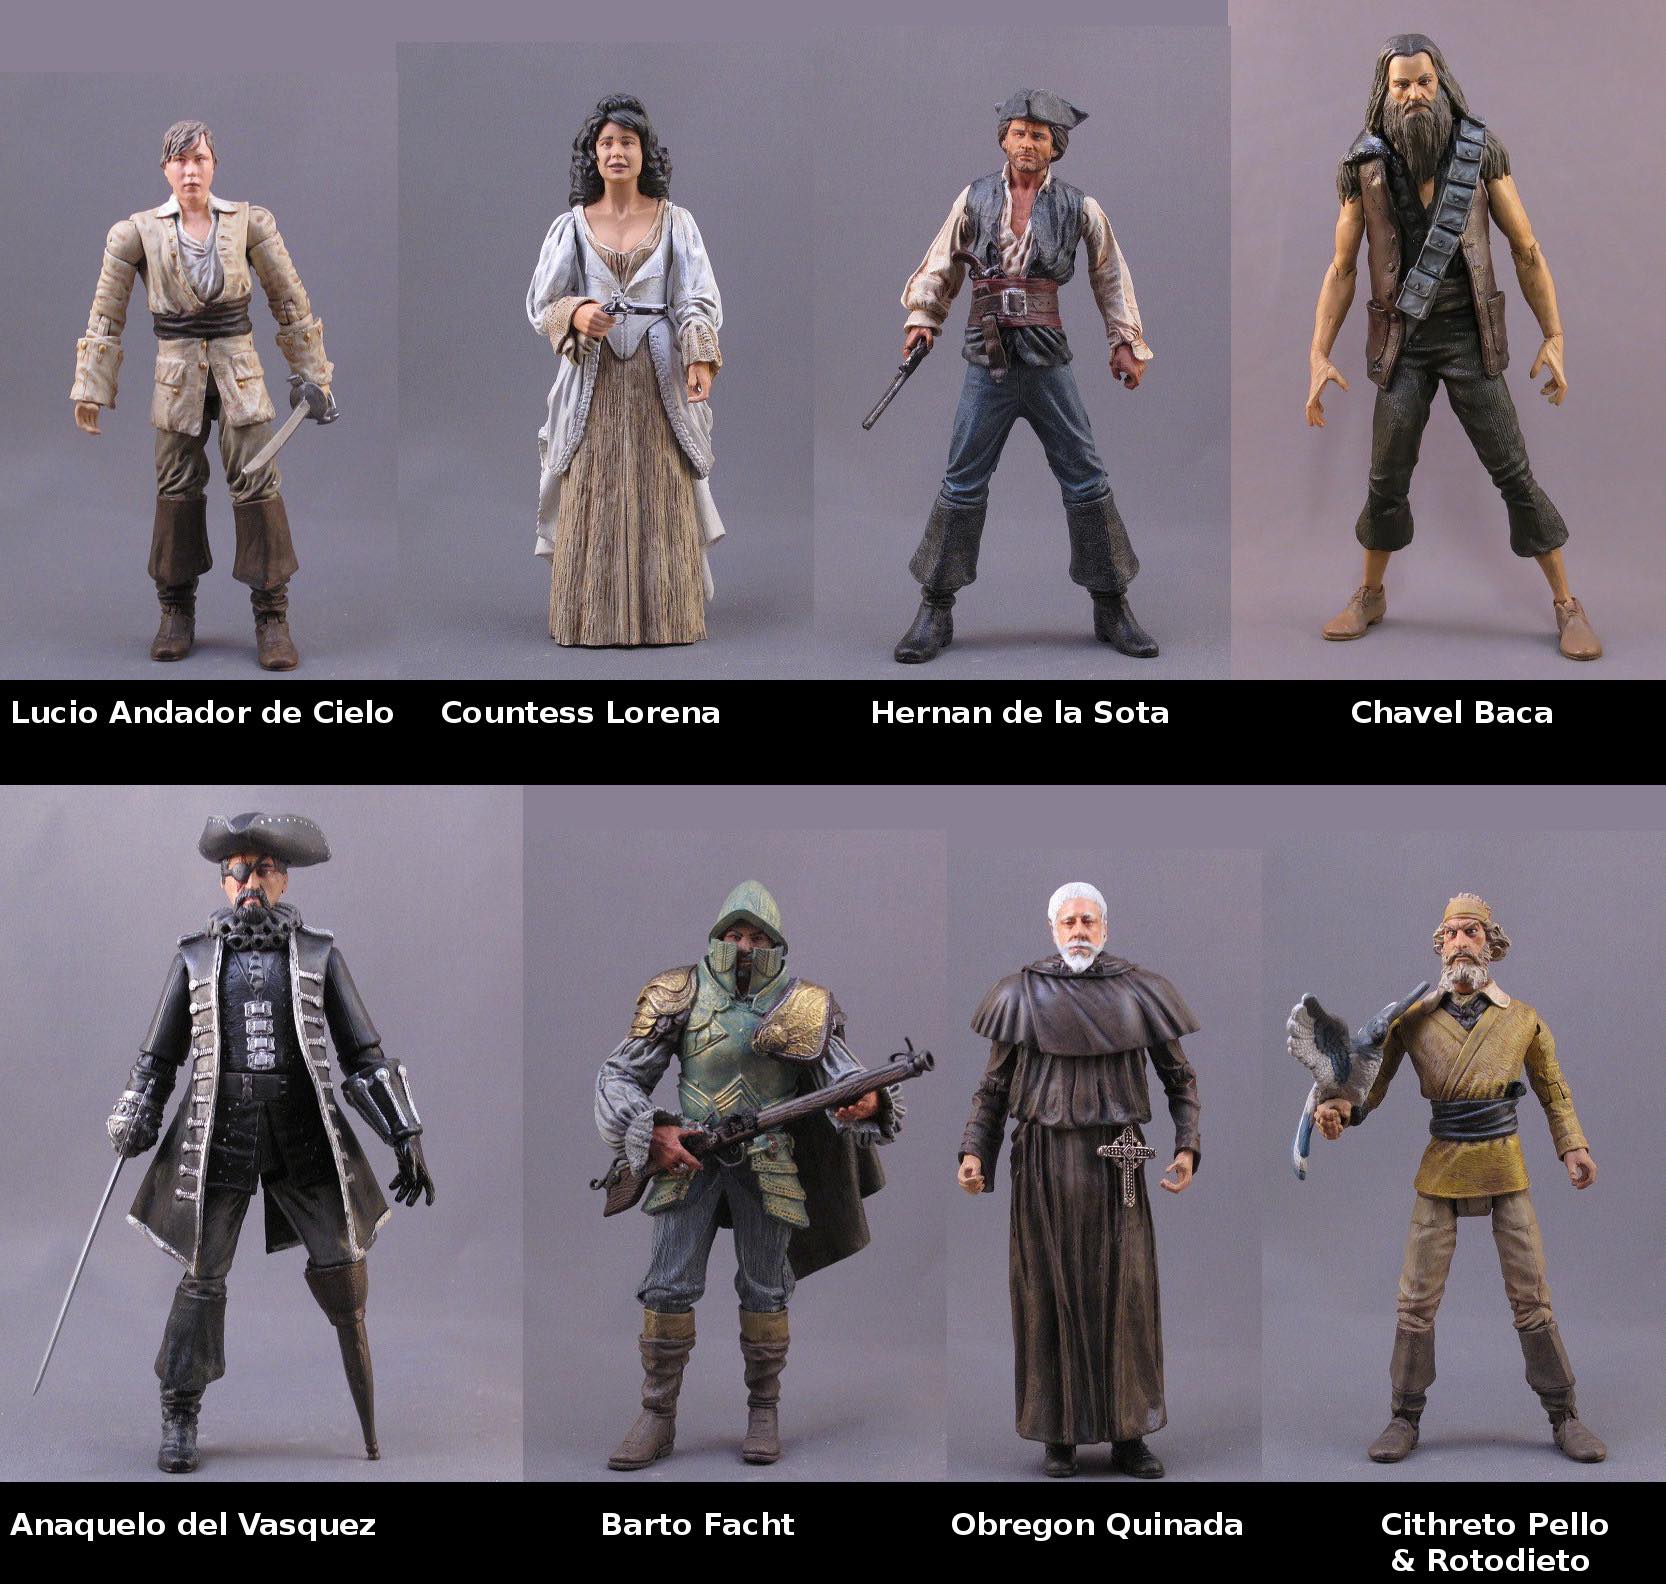 Star Wars Re-imagined In All Sort Of Settings As Toys... Sorry, Action Figures.